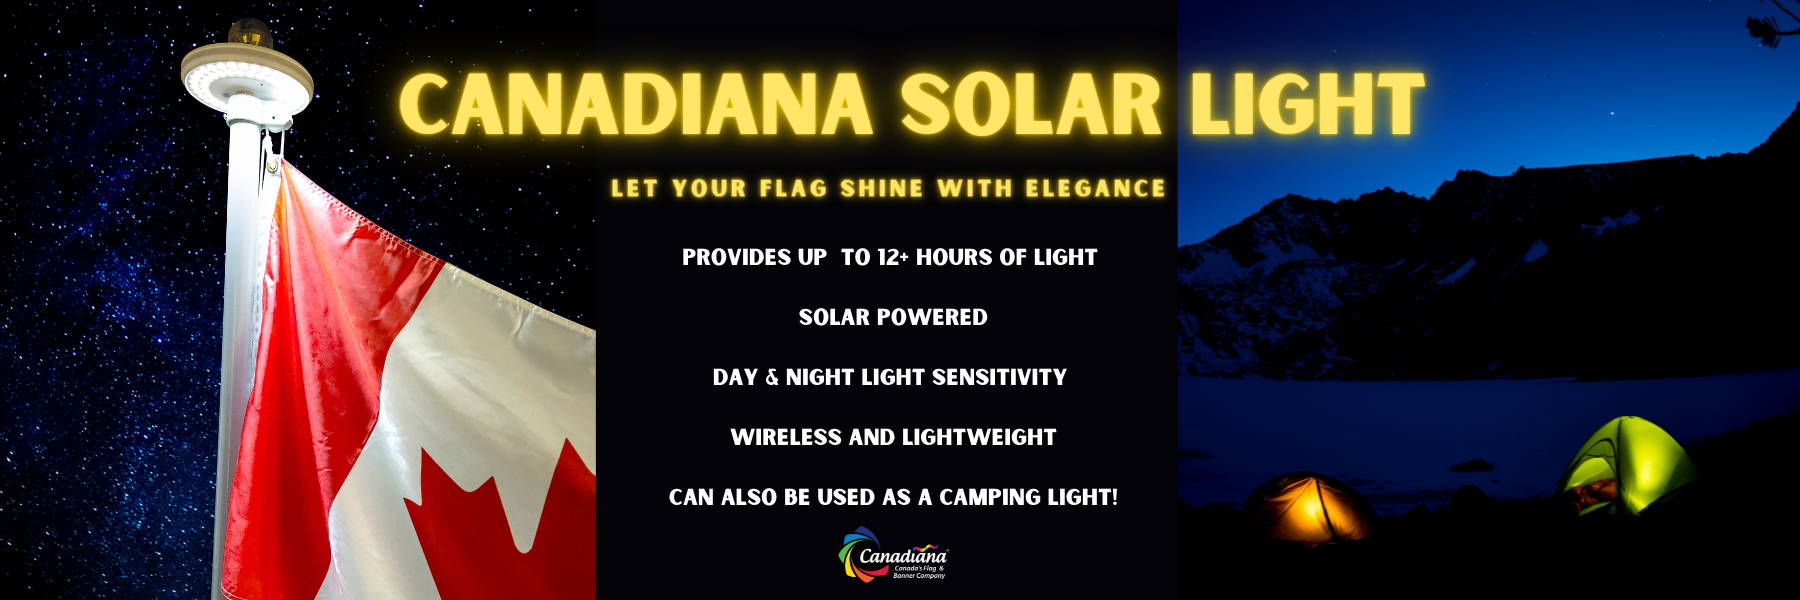 Canadiana Flag Solar Light provides up ot more than 12 hours of light for your Canadian flag at night. Our solar powered light can also be used as a camping light for your tent in the outdoors. Our solar light is also lightweight and wireless